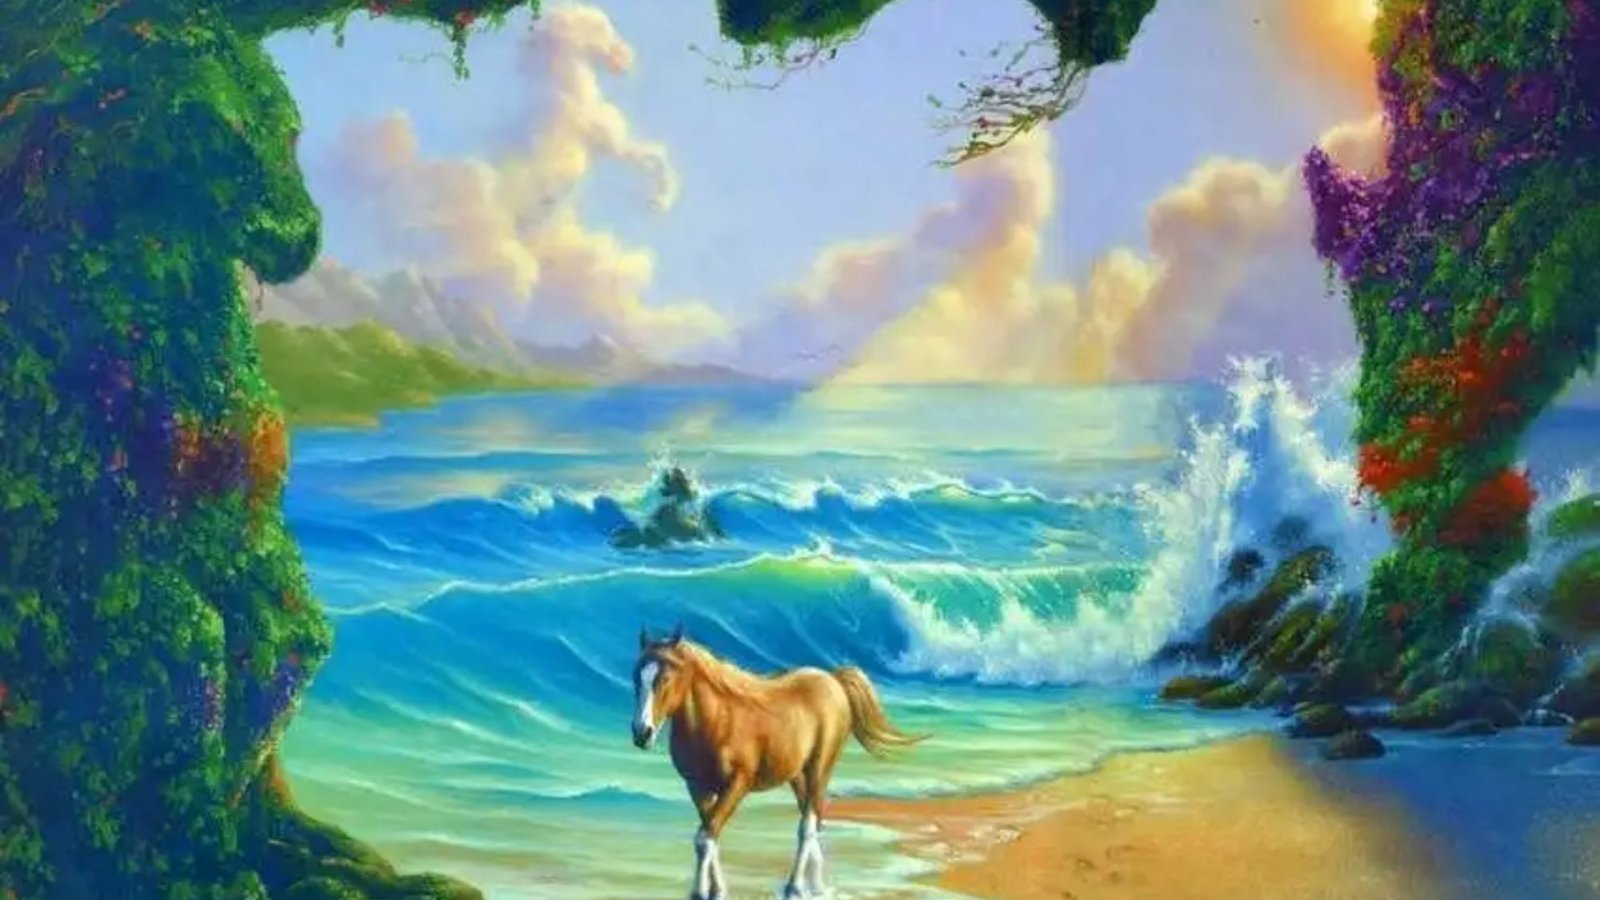 Everyone can see the horse but you have 2020 vision a high IQ if you can see the seven others in nine seconds